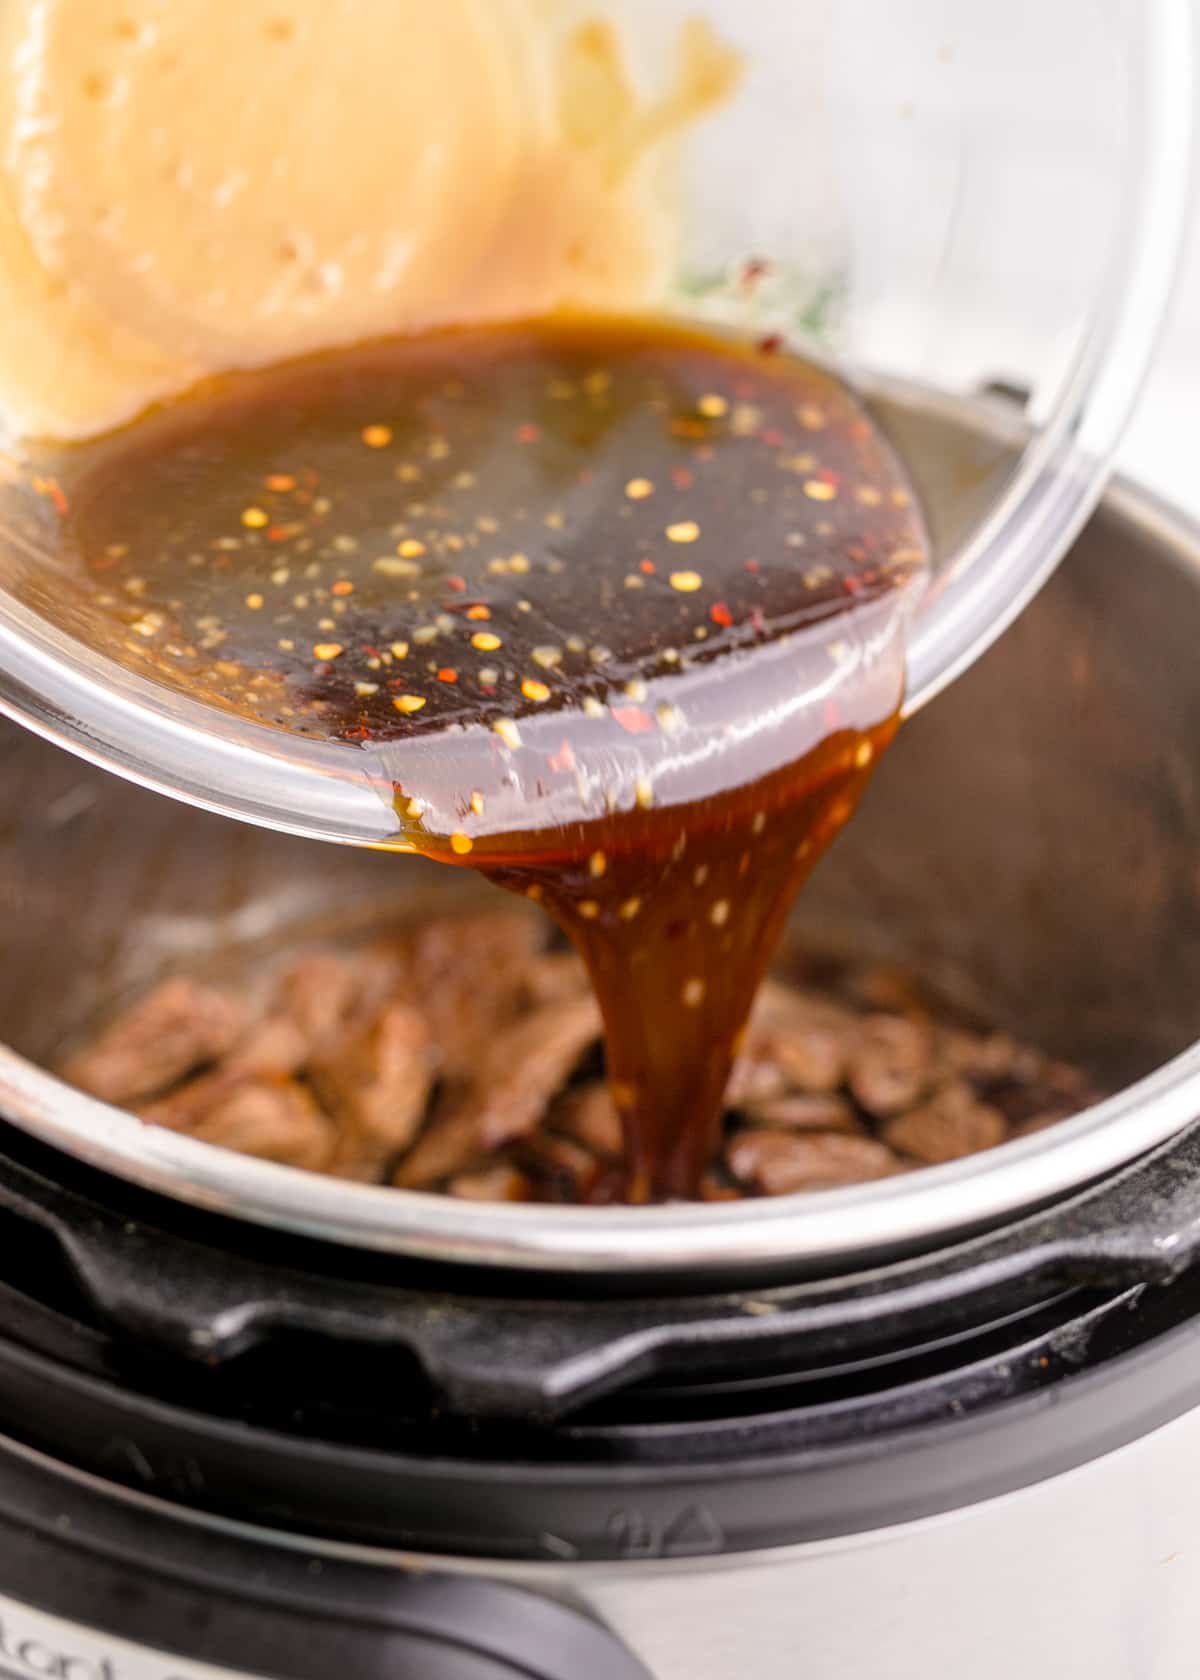 Seasoned sauce being poured over the cooked meat and with broth.